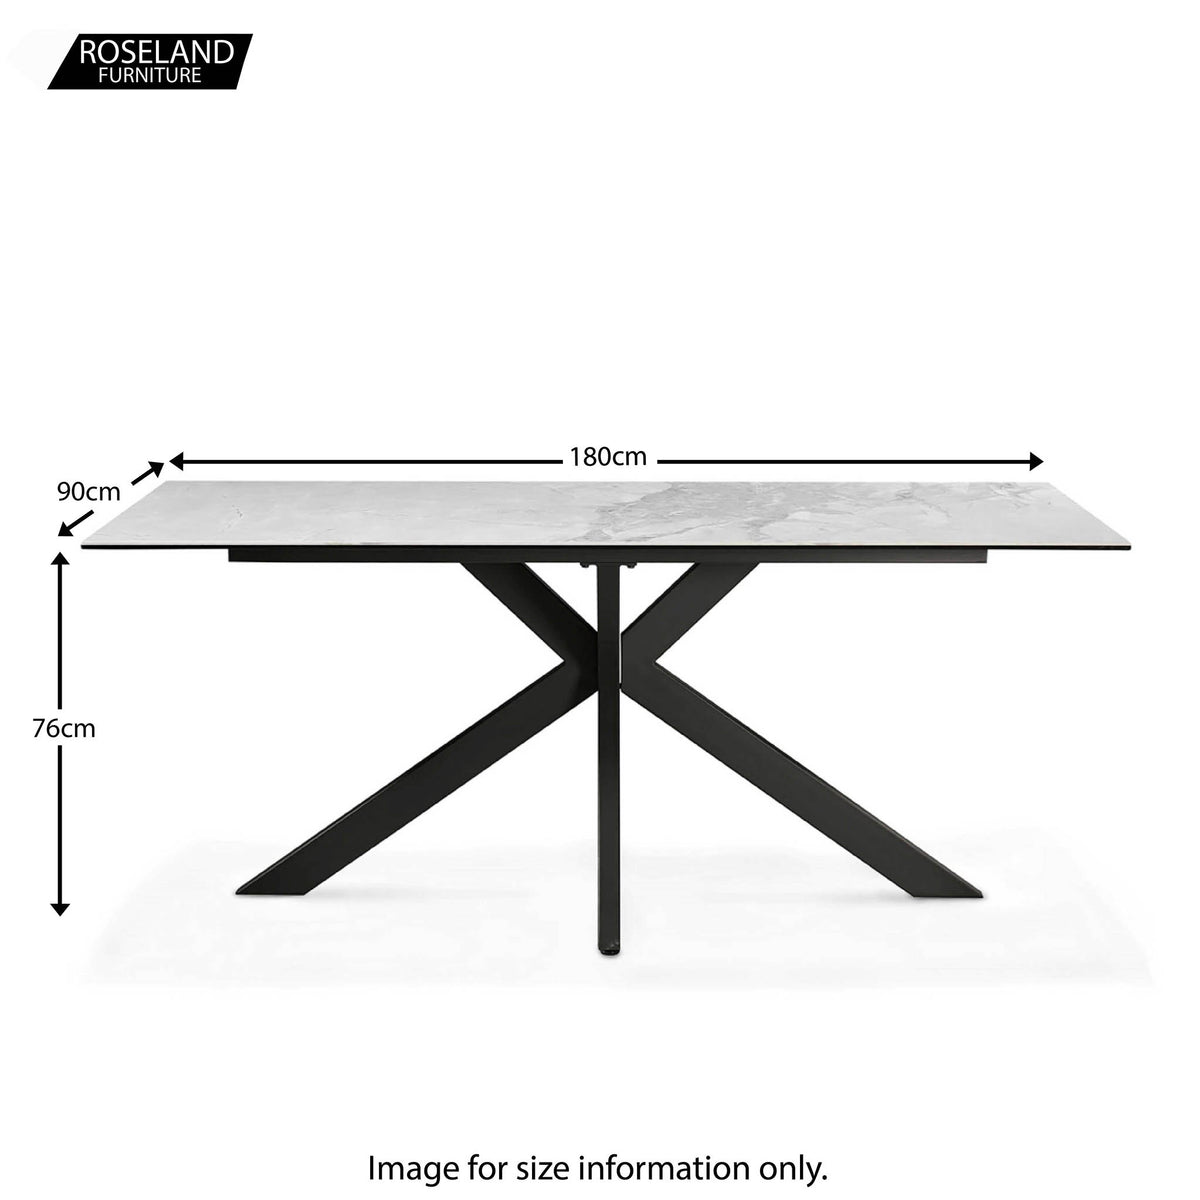 Harlow 180cm Ceramic Dining Table Light Marble - Size Guide